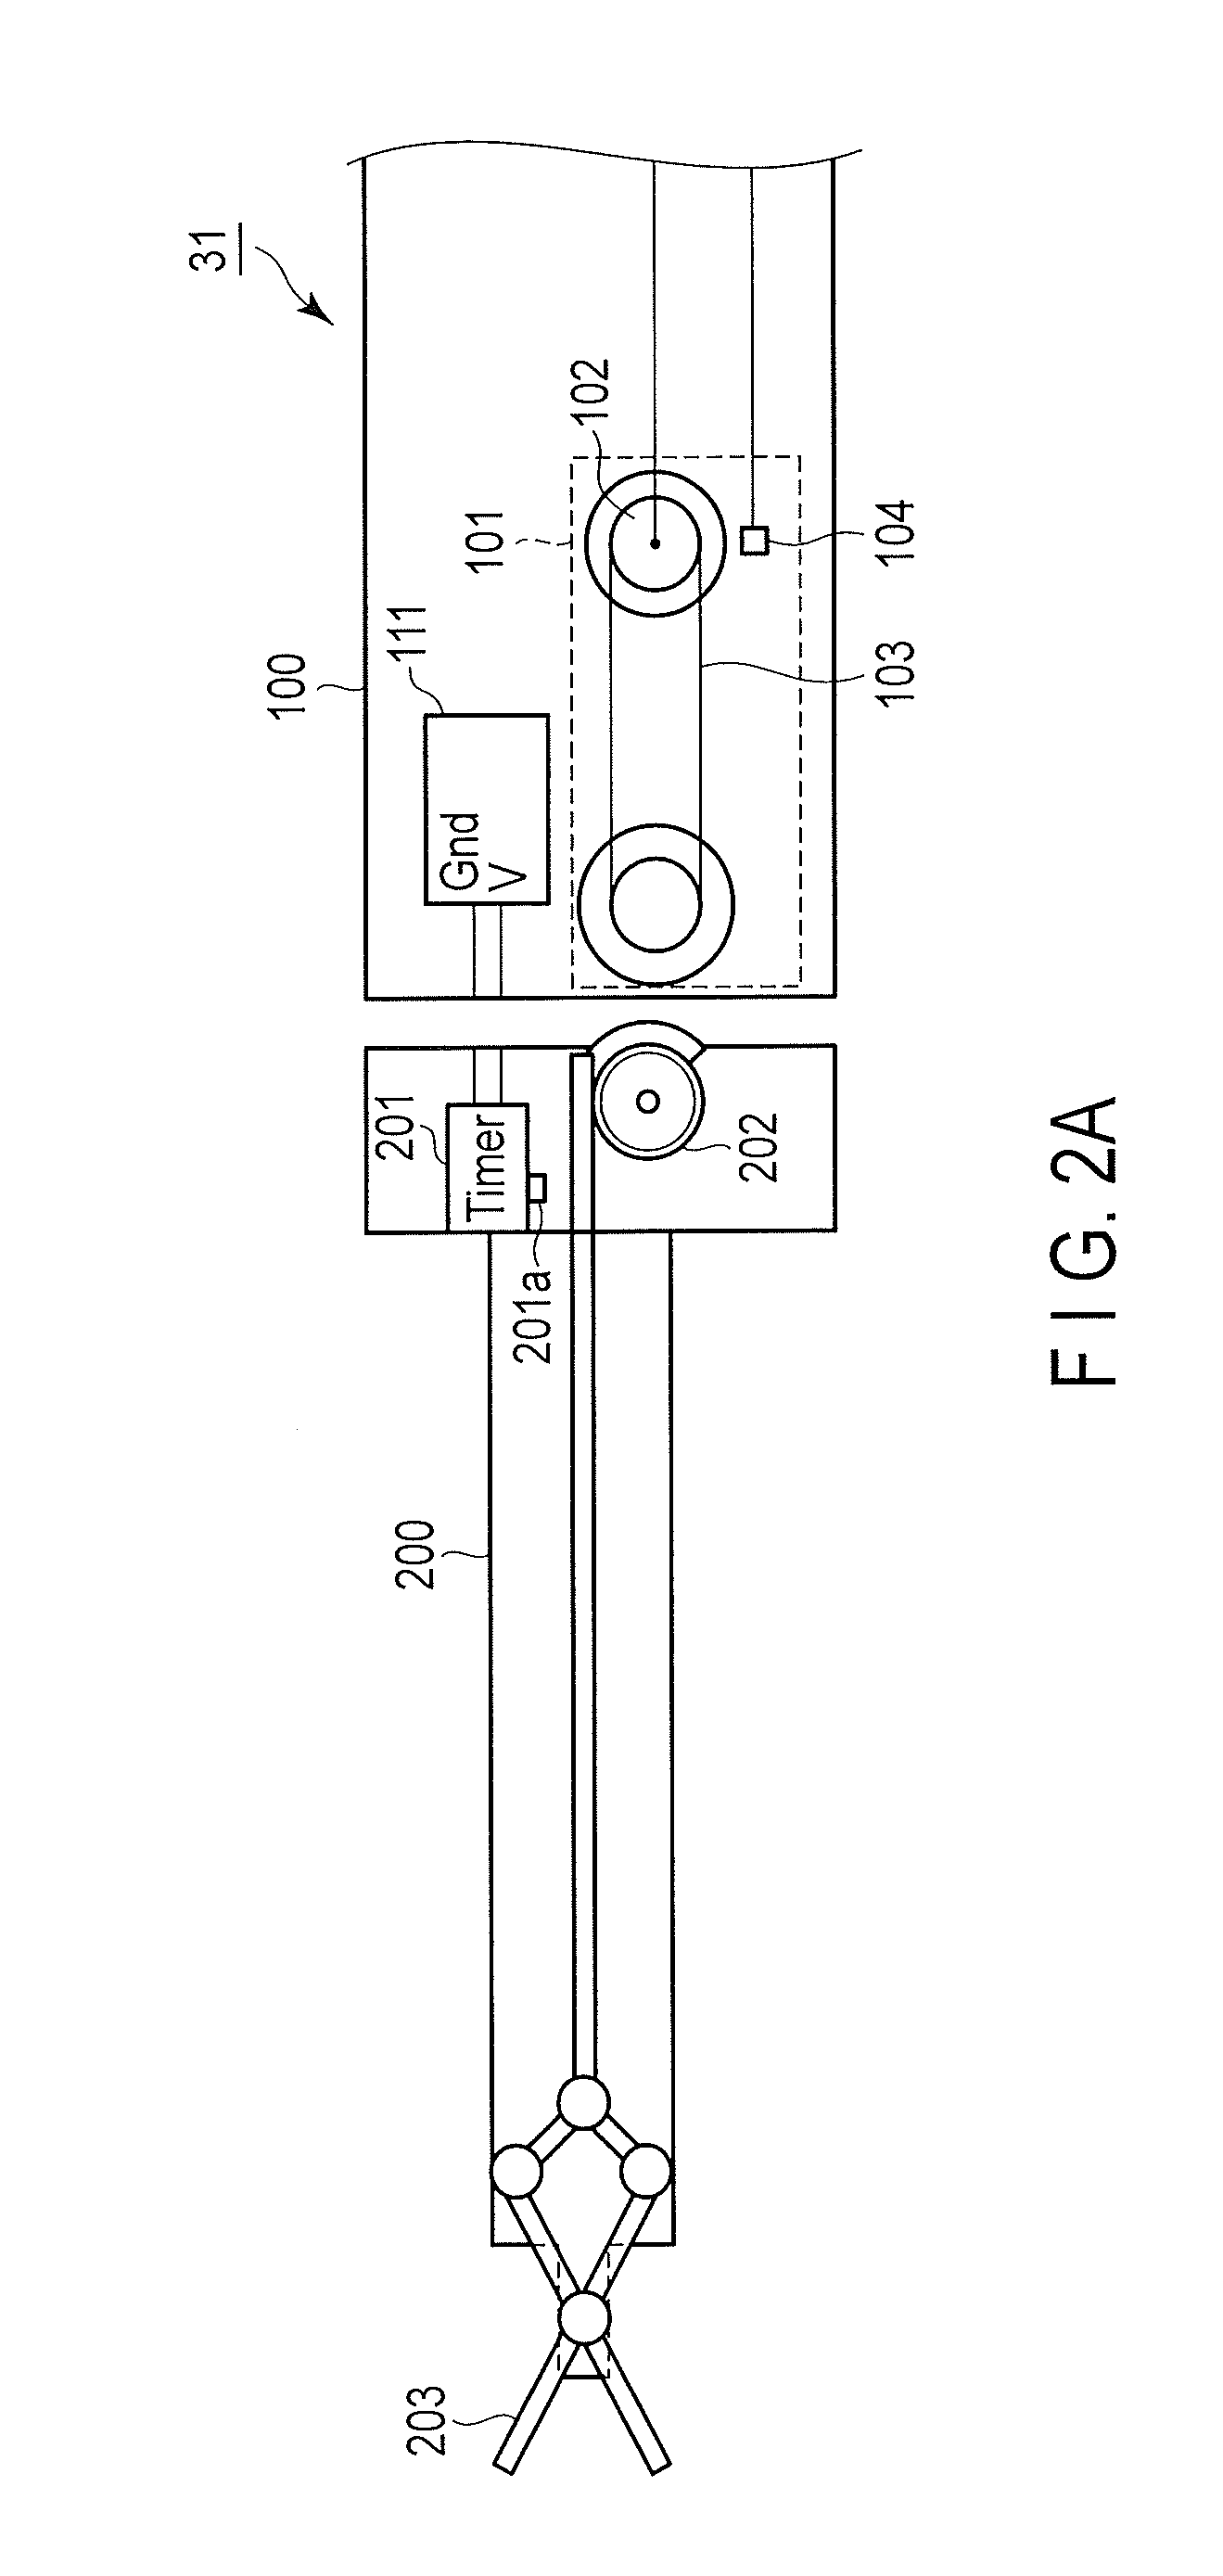 Surgical instrument and operation support system having the surgical instrument